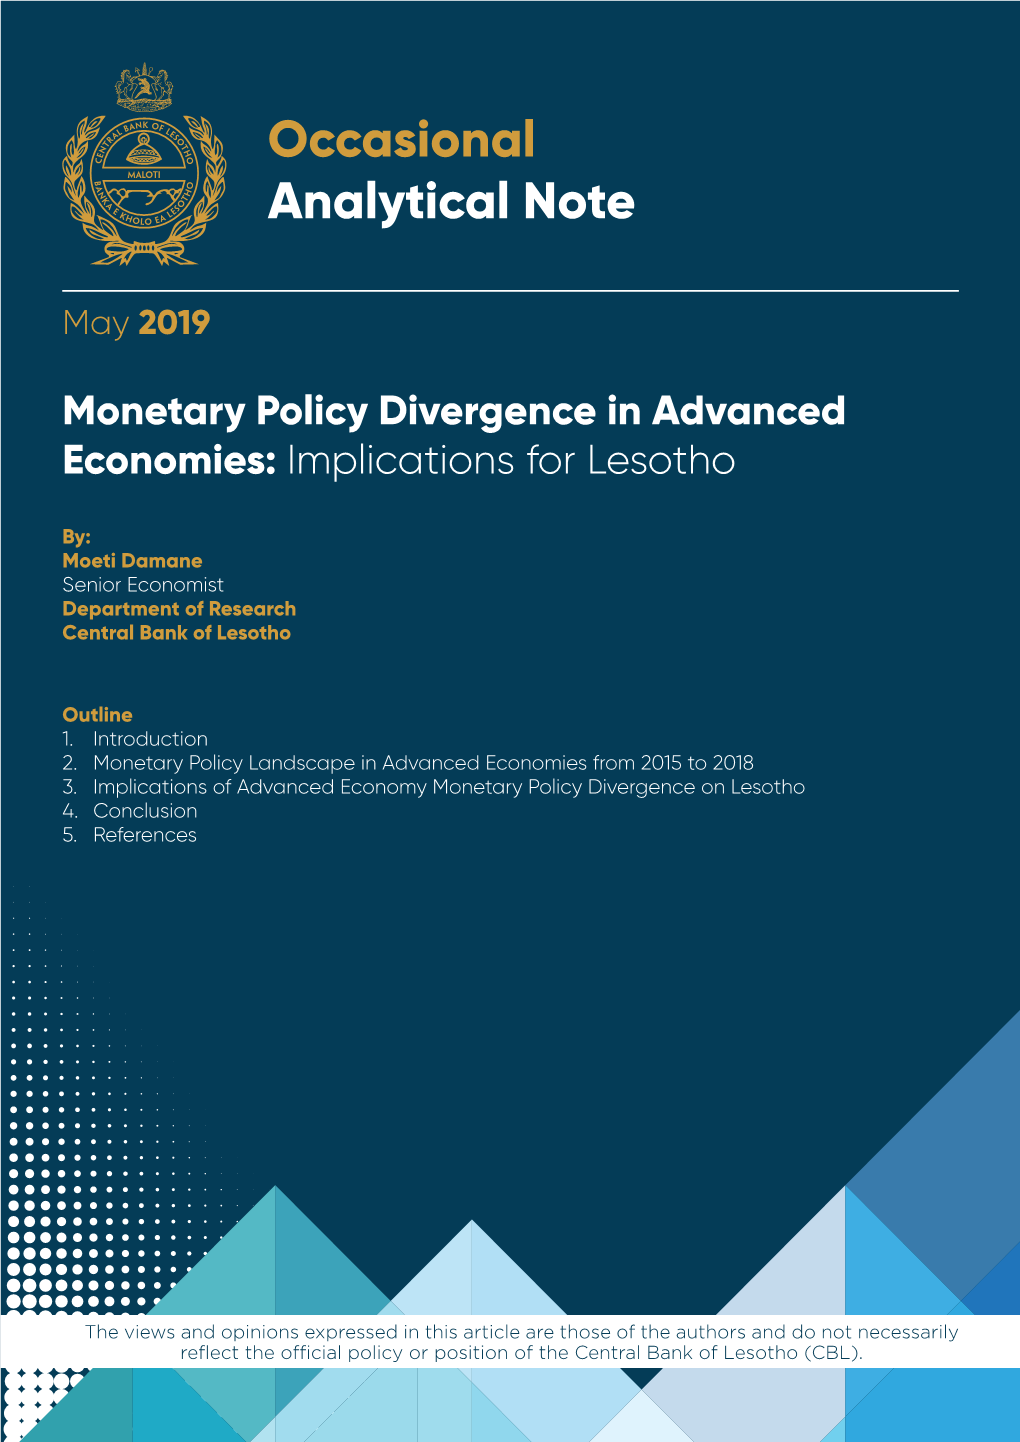 Monetary Policy Divergence in Advanced Economies: Implications for Lesotho